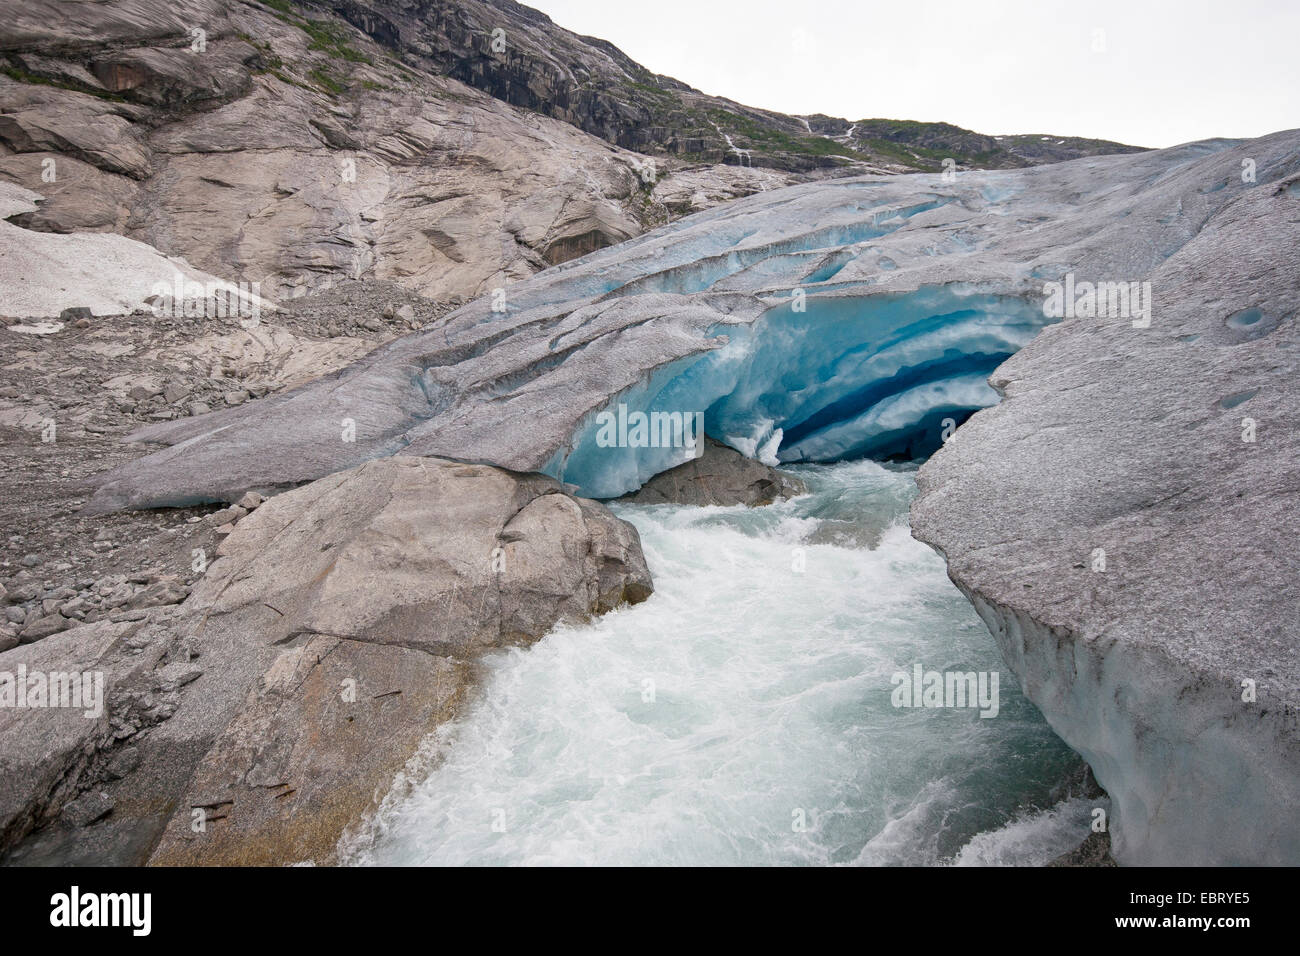 melt water leaking out of glacier snout of Nigardsbreen, a glacier arm of Jostedalsbreen glacier, Norway, Jostedalsbreen National Park Stock Photo